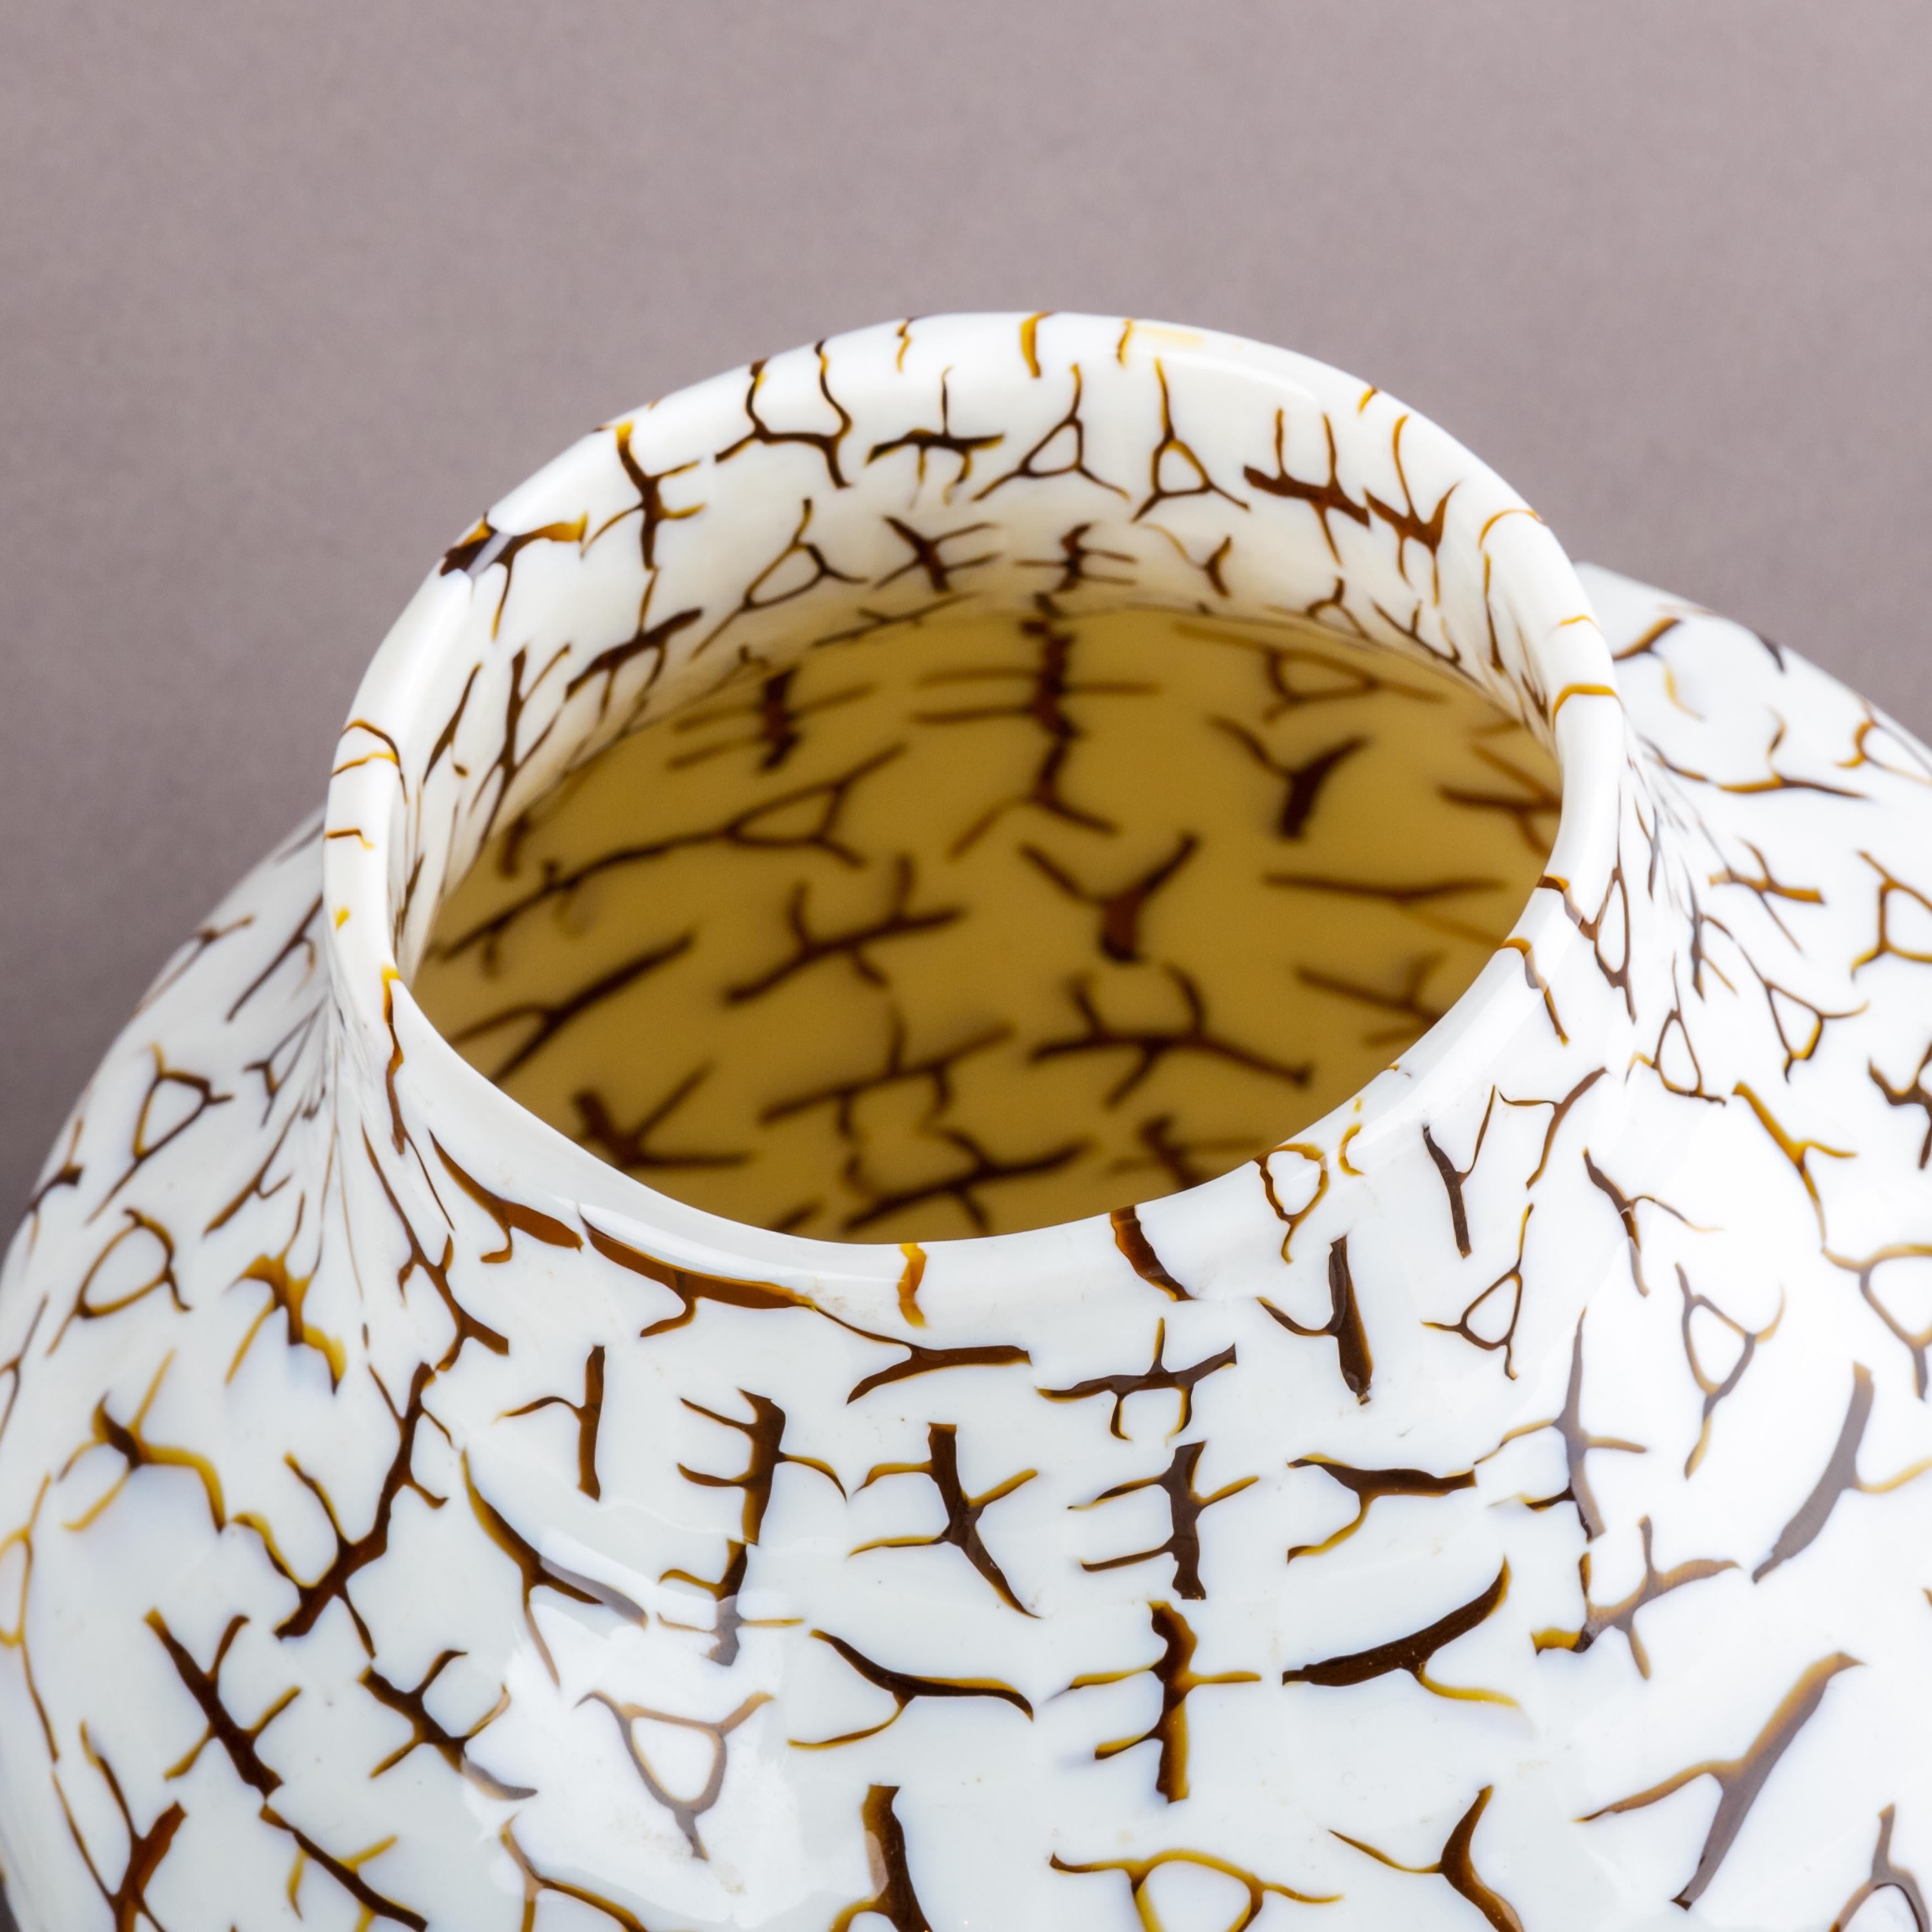 Wonderful Murrine vintage vase designed by Ludovico Diaz de Santillana for Venini in Murano (Italy)
This particular example has been produced in 1983 and is different by later reissues of the model by his thickness, walls of the piece are more